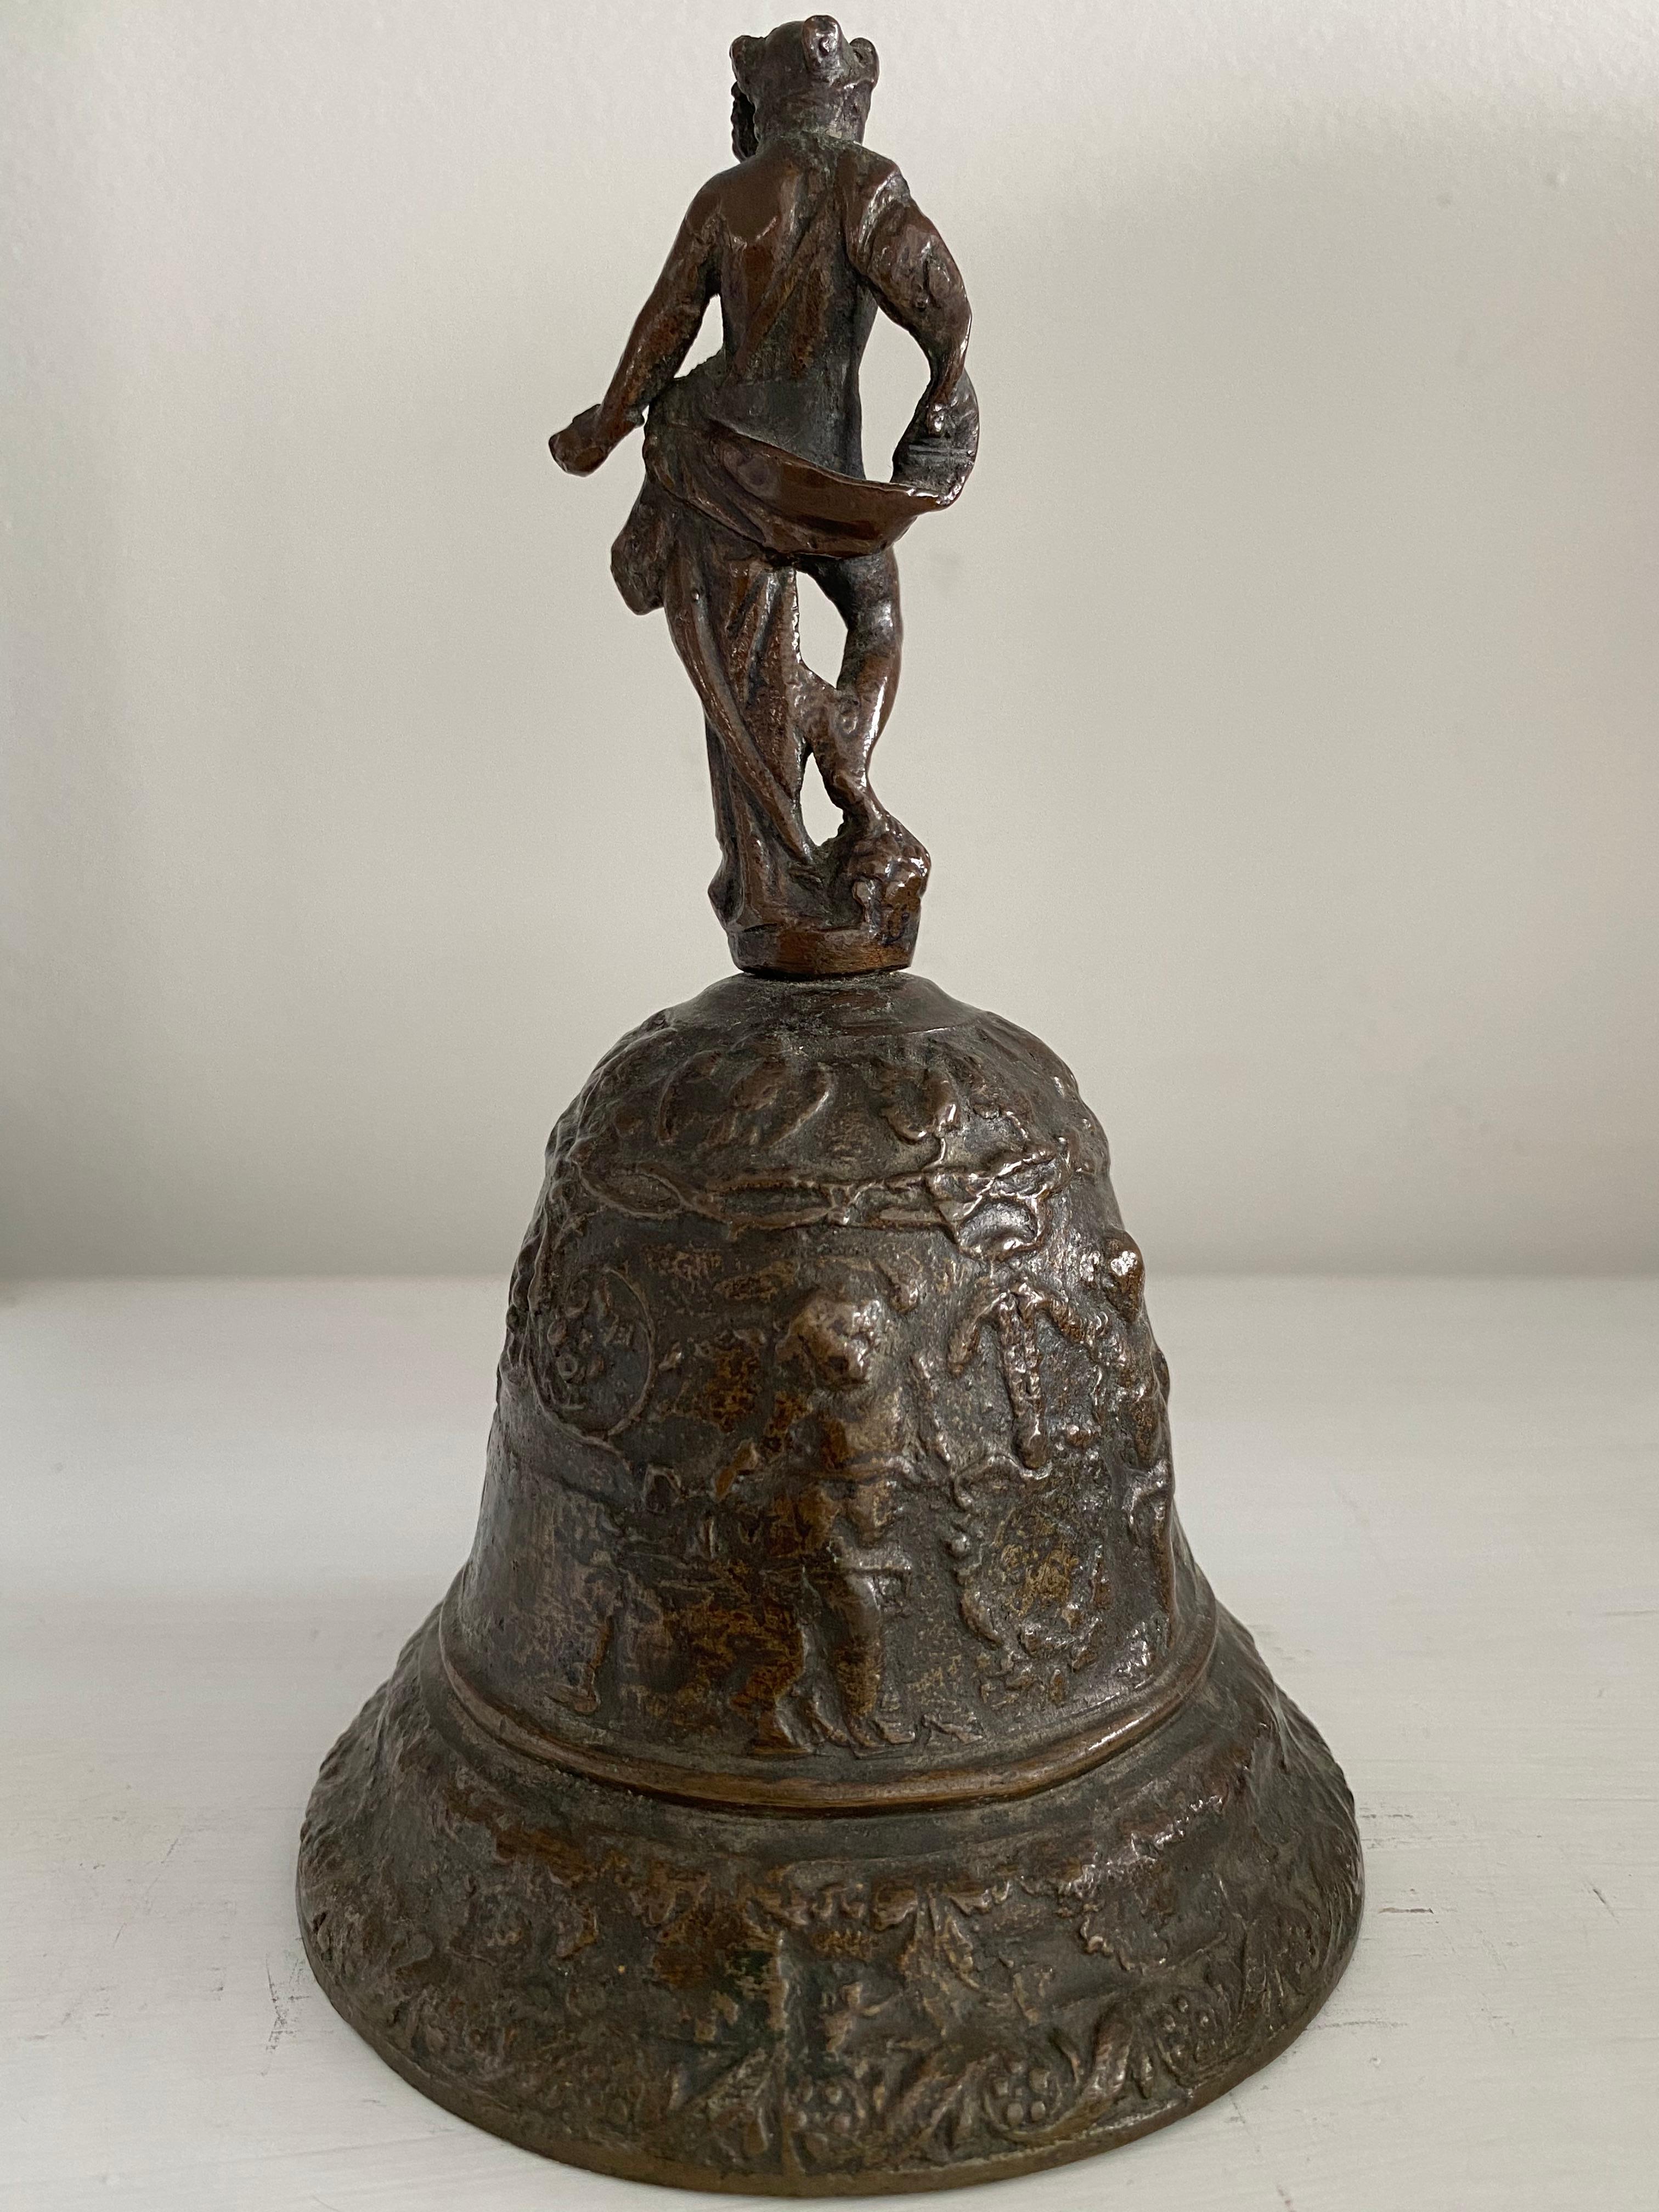 This bronze bell is of the type cast in Venice in the 16th century. It is topped with a figure of Mercury surmounting a procession of putti with garlands and a blank cartouche. It measures 7